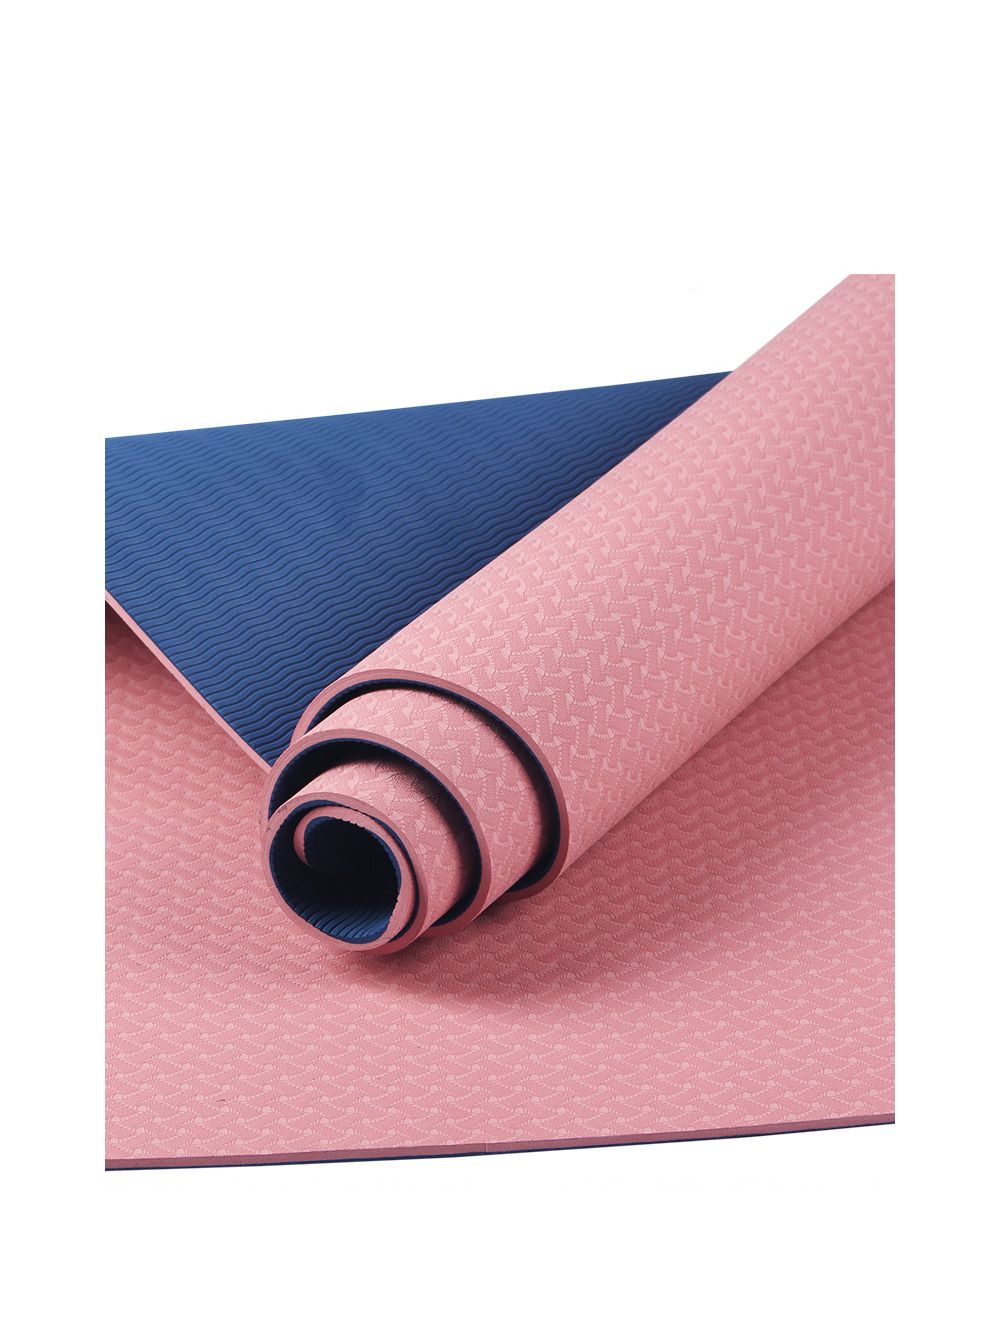 8mm Extra Thick High Resilience TPE Yoga/Pilates Mat